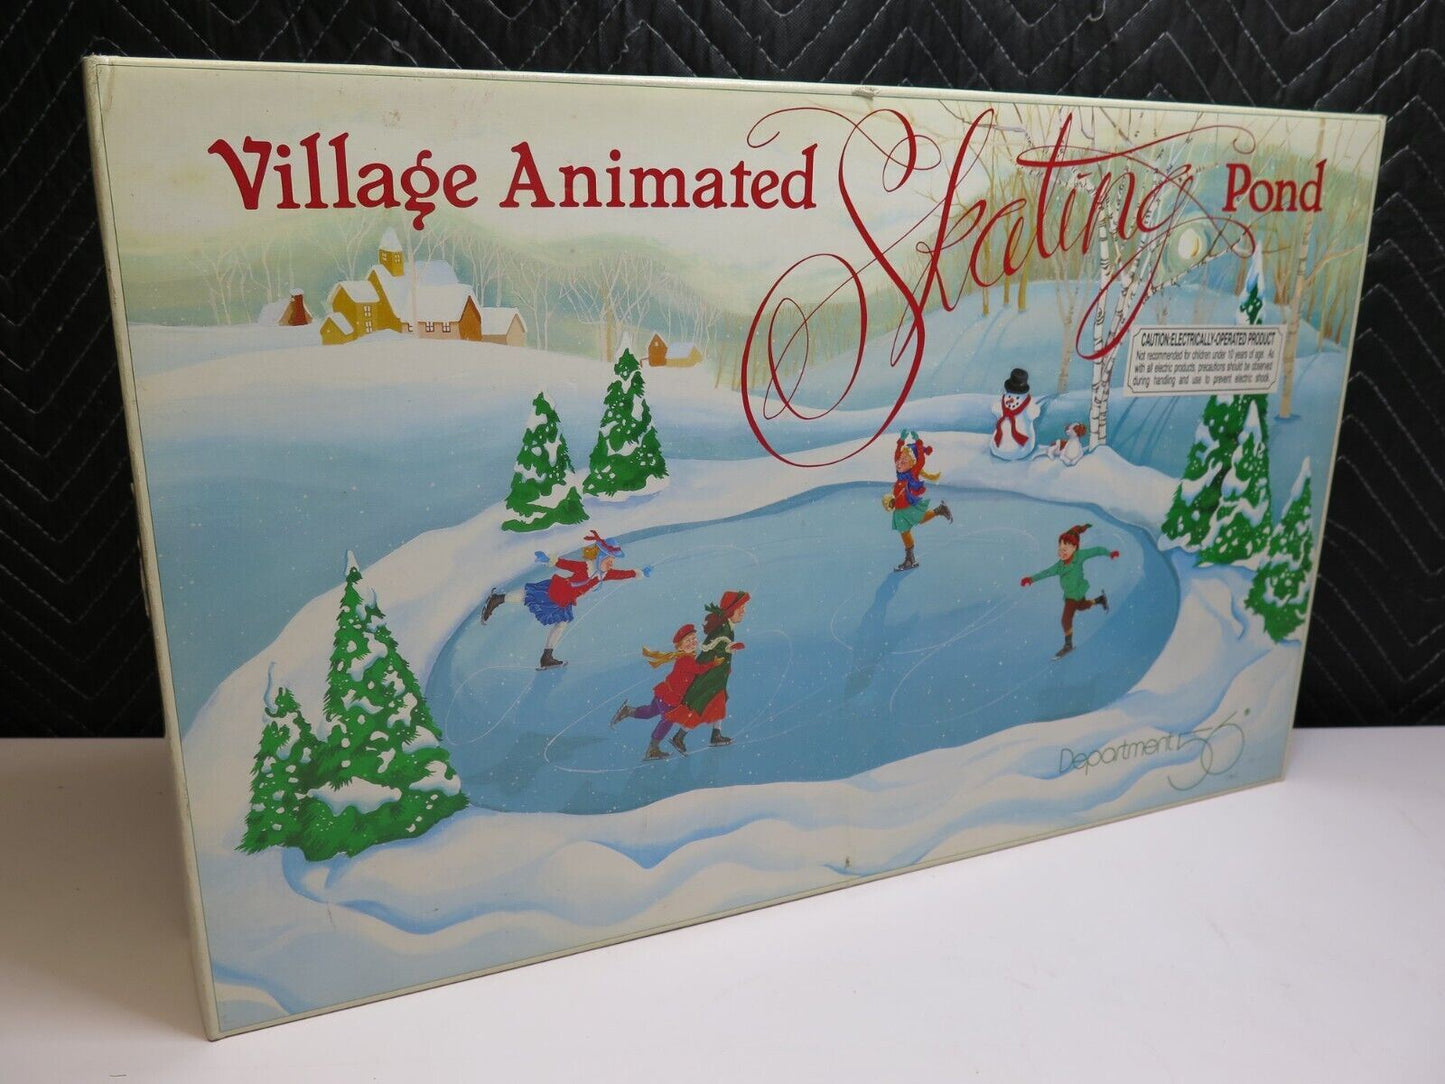 Department 56 Village Animated Skating Pond - 5229-9 - Complete in Box - Working